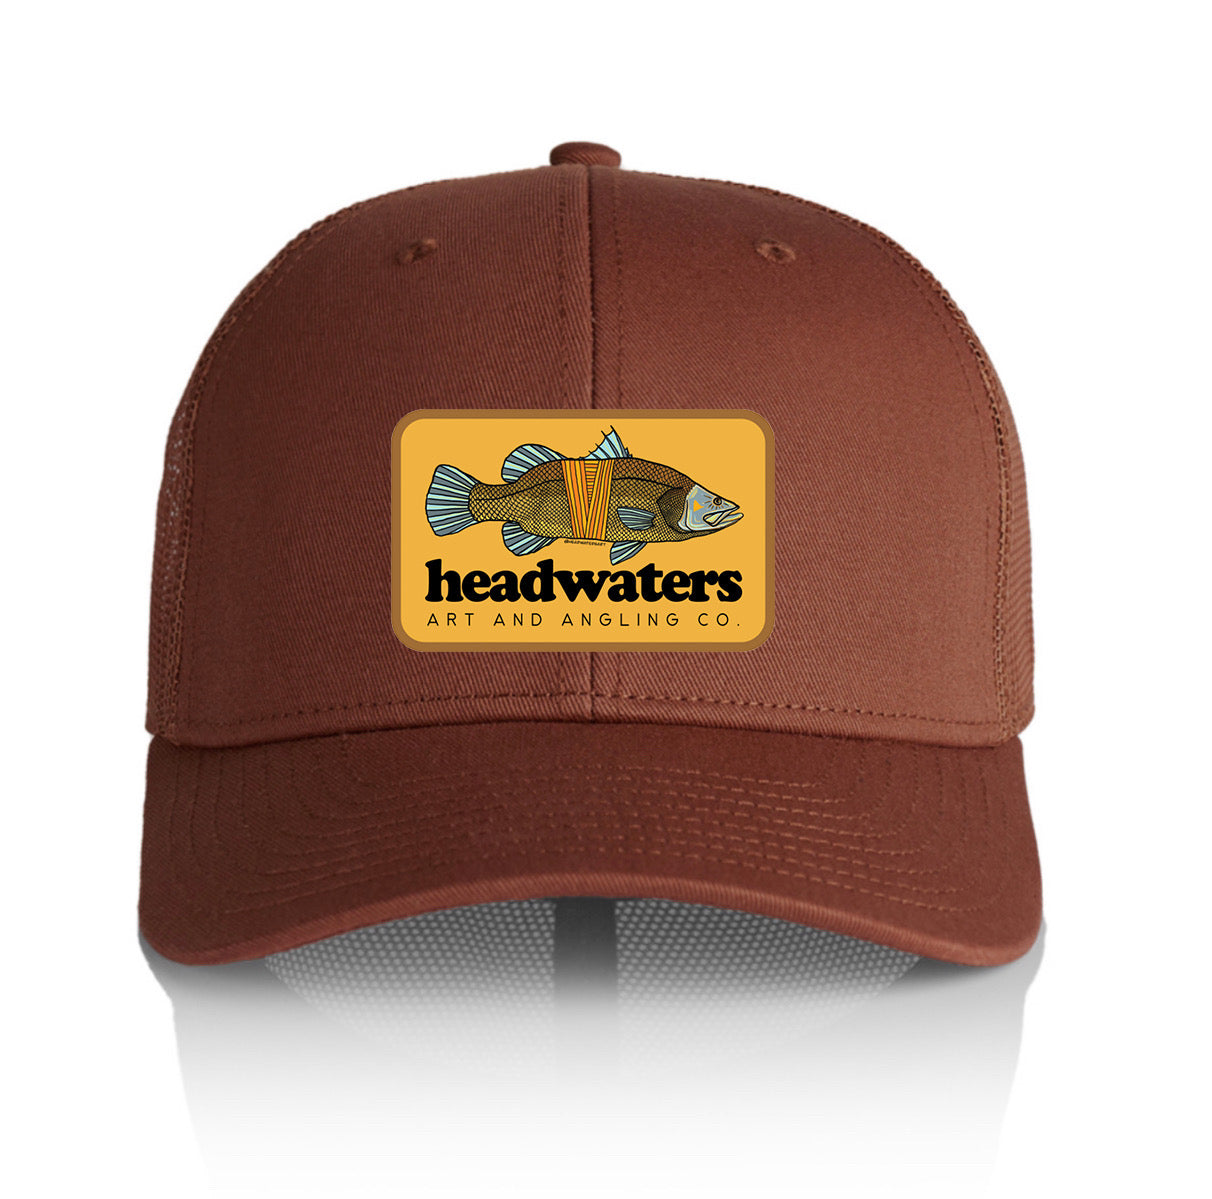 Trucker hats – Headwaters Art and Angling Co